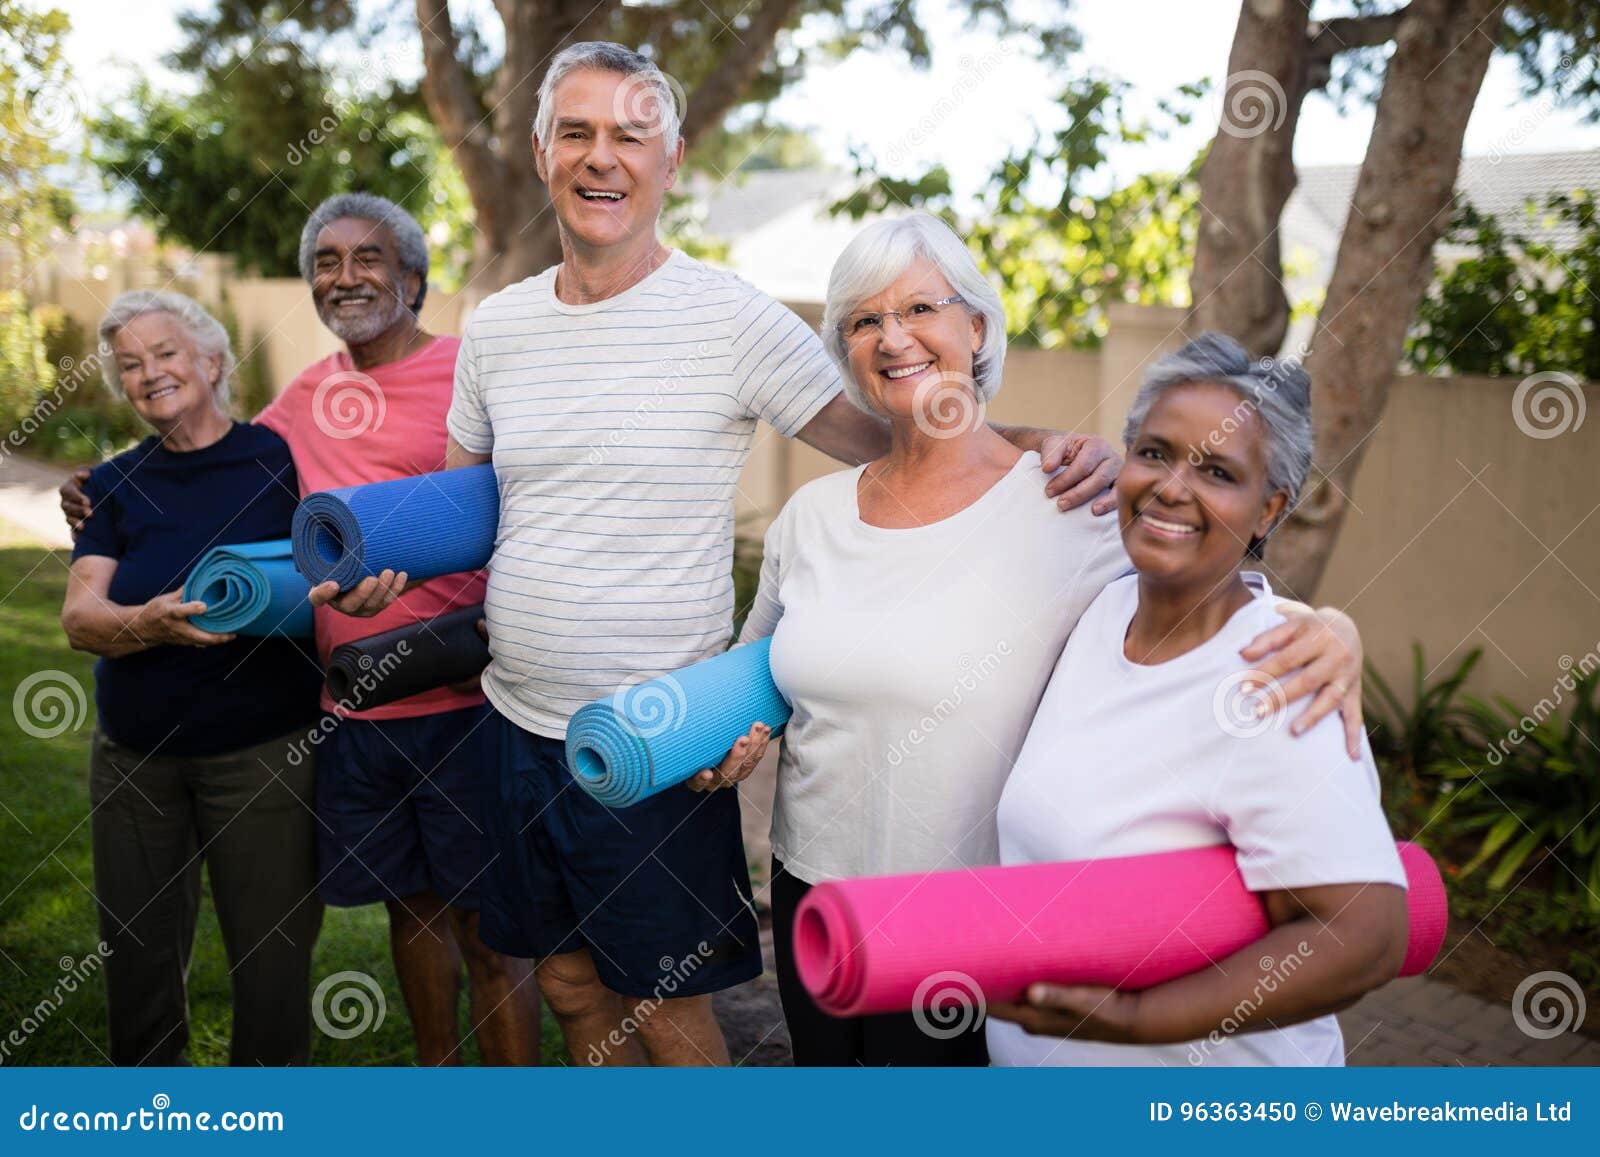 portrait of happy multi-ethnic friends carrying exercise mats